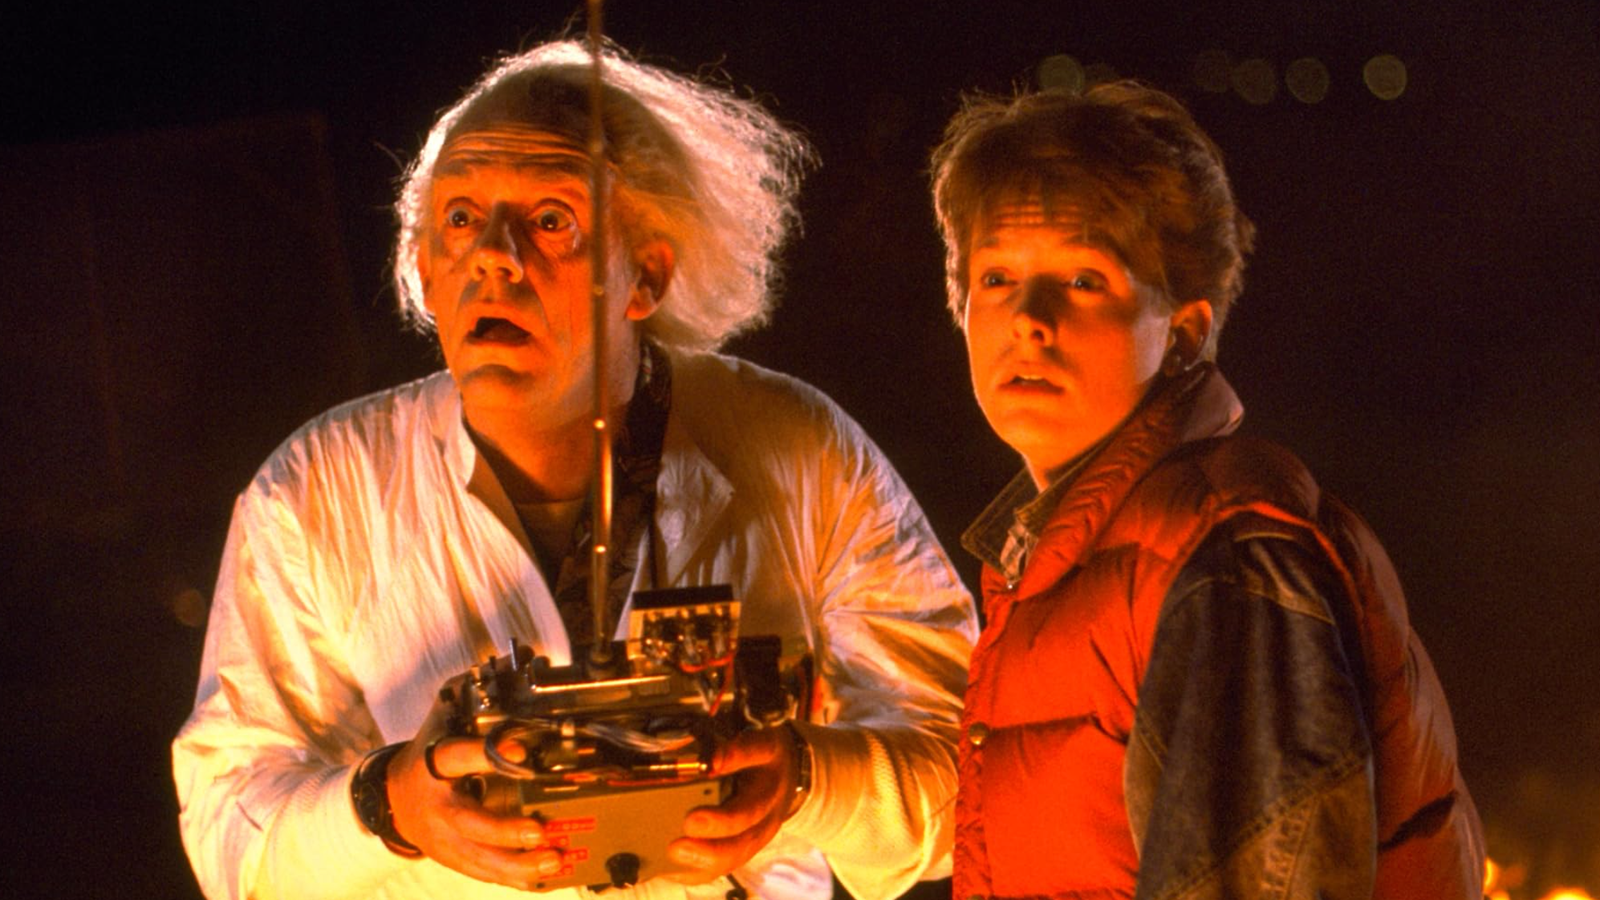 Back To The Future: All 8 Timelines In The Movies Explained